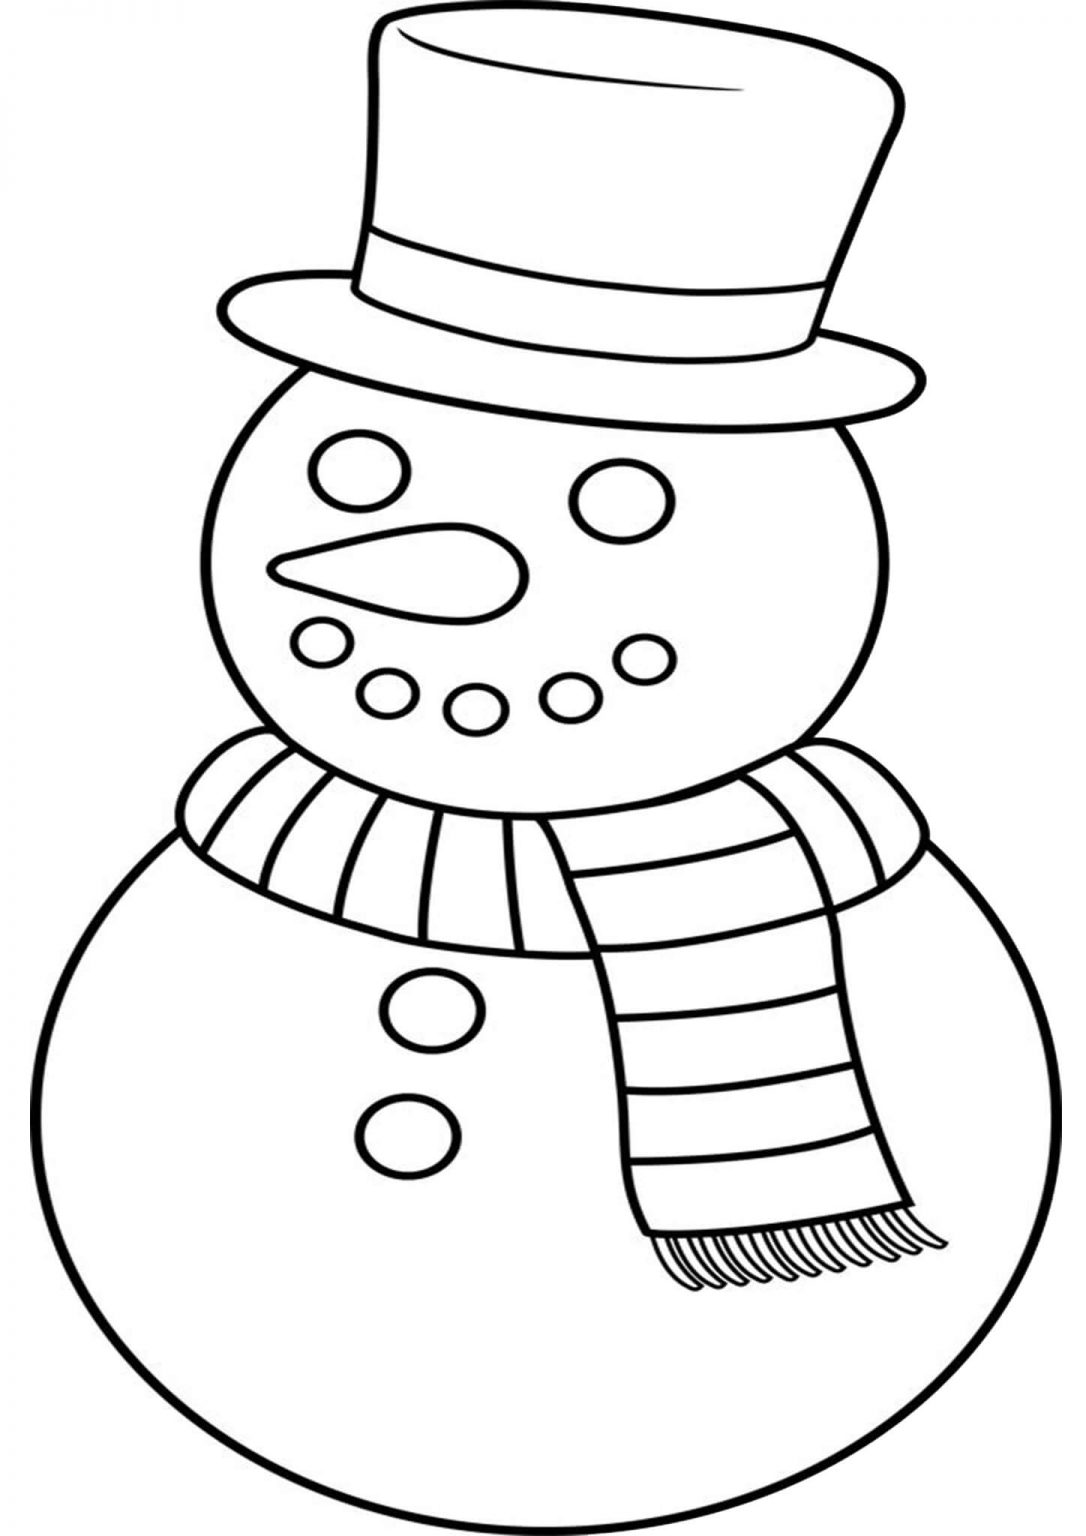 coloring-pages-christmas-snowman-coloring-pages-free-and-printable